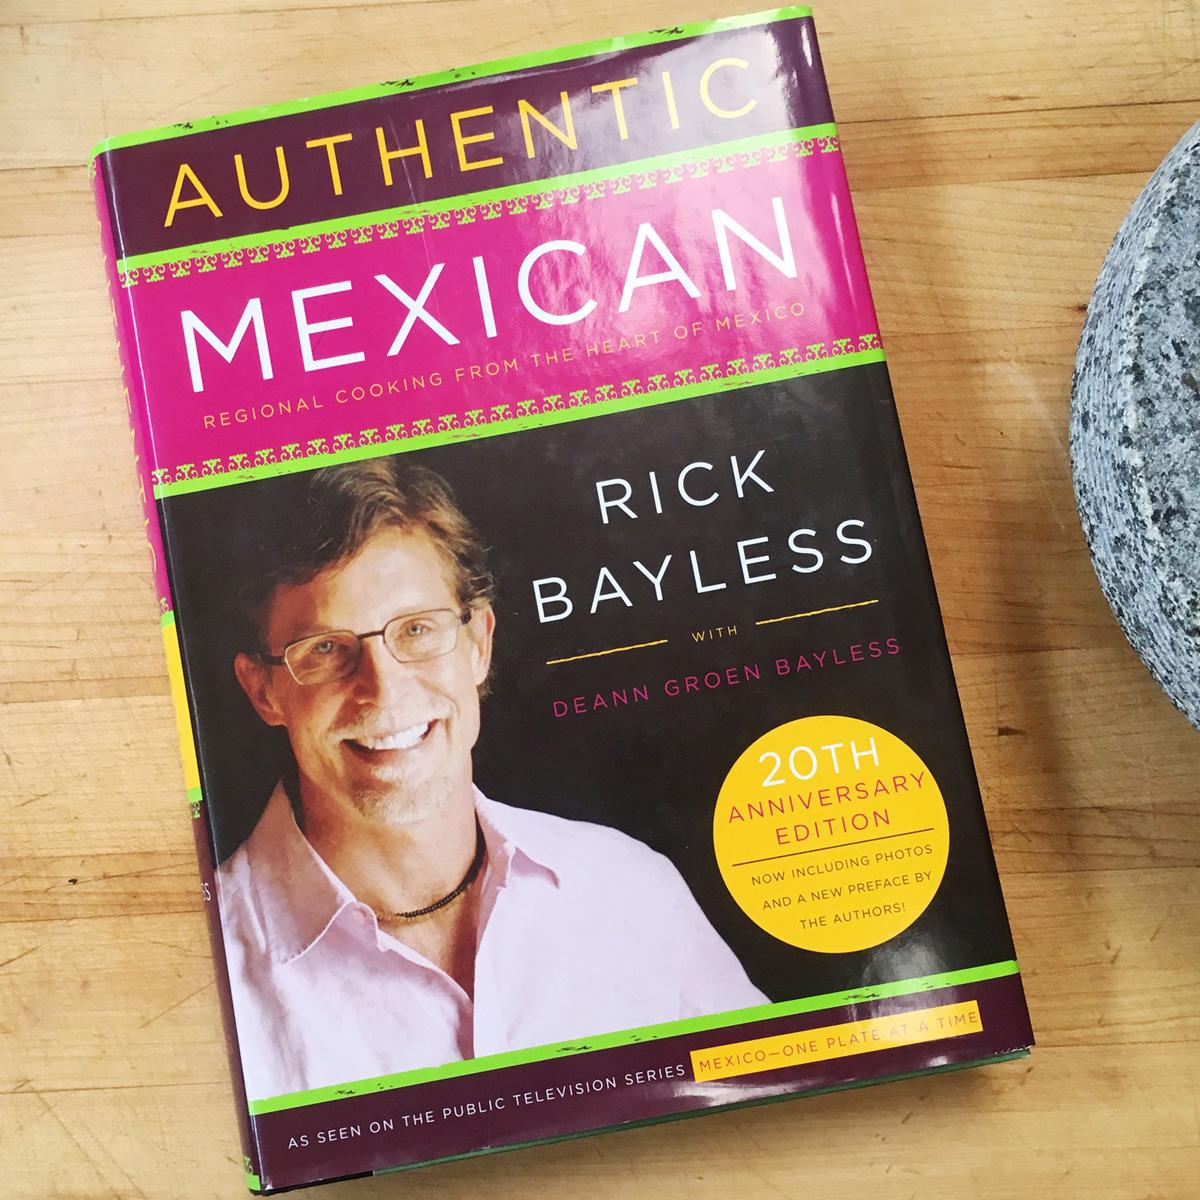 Authentic Mexican Regional Cooking from the Heart of Mexico eBook for $1.99